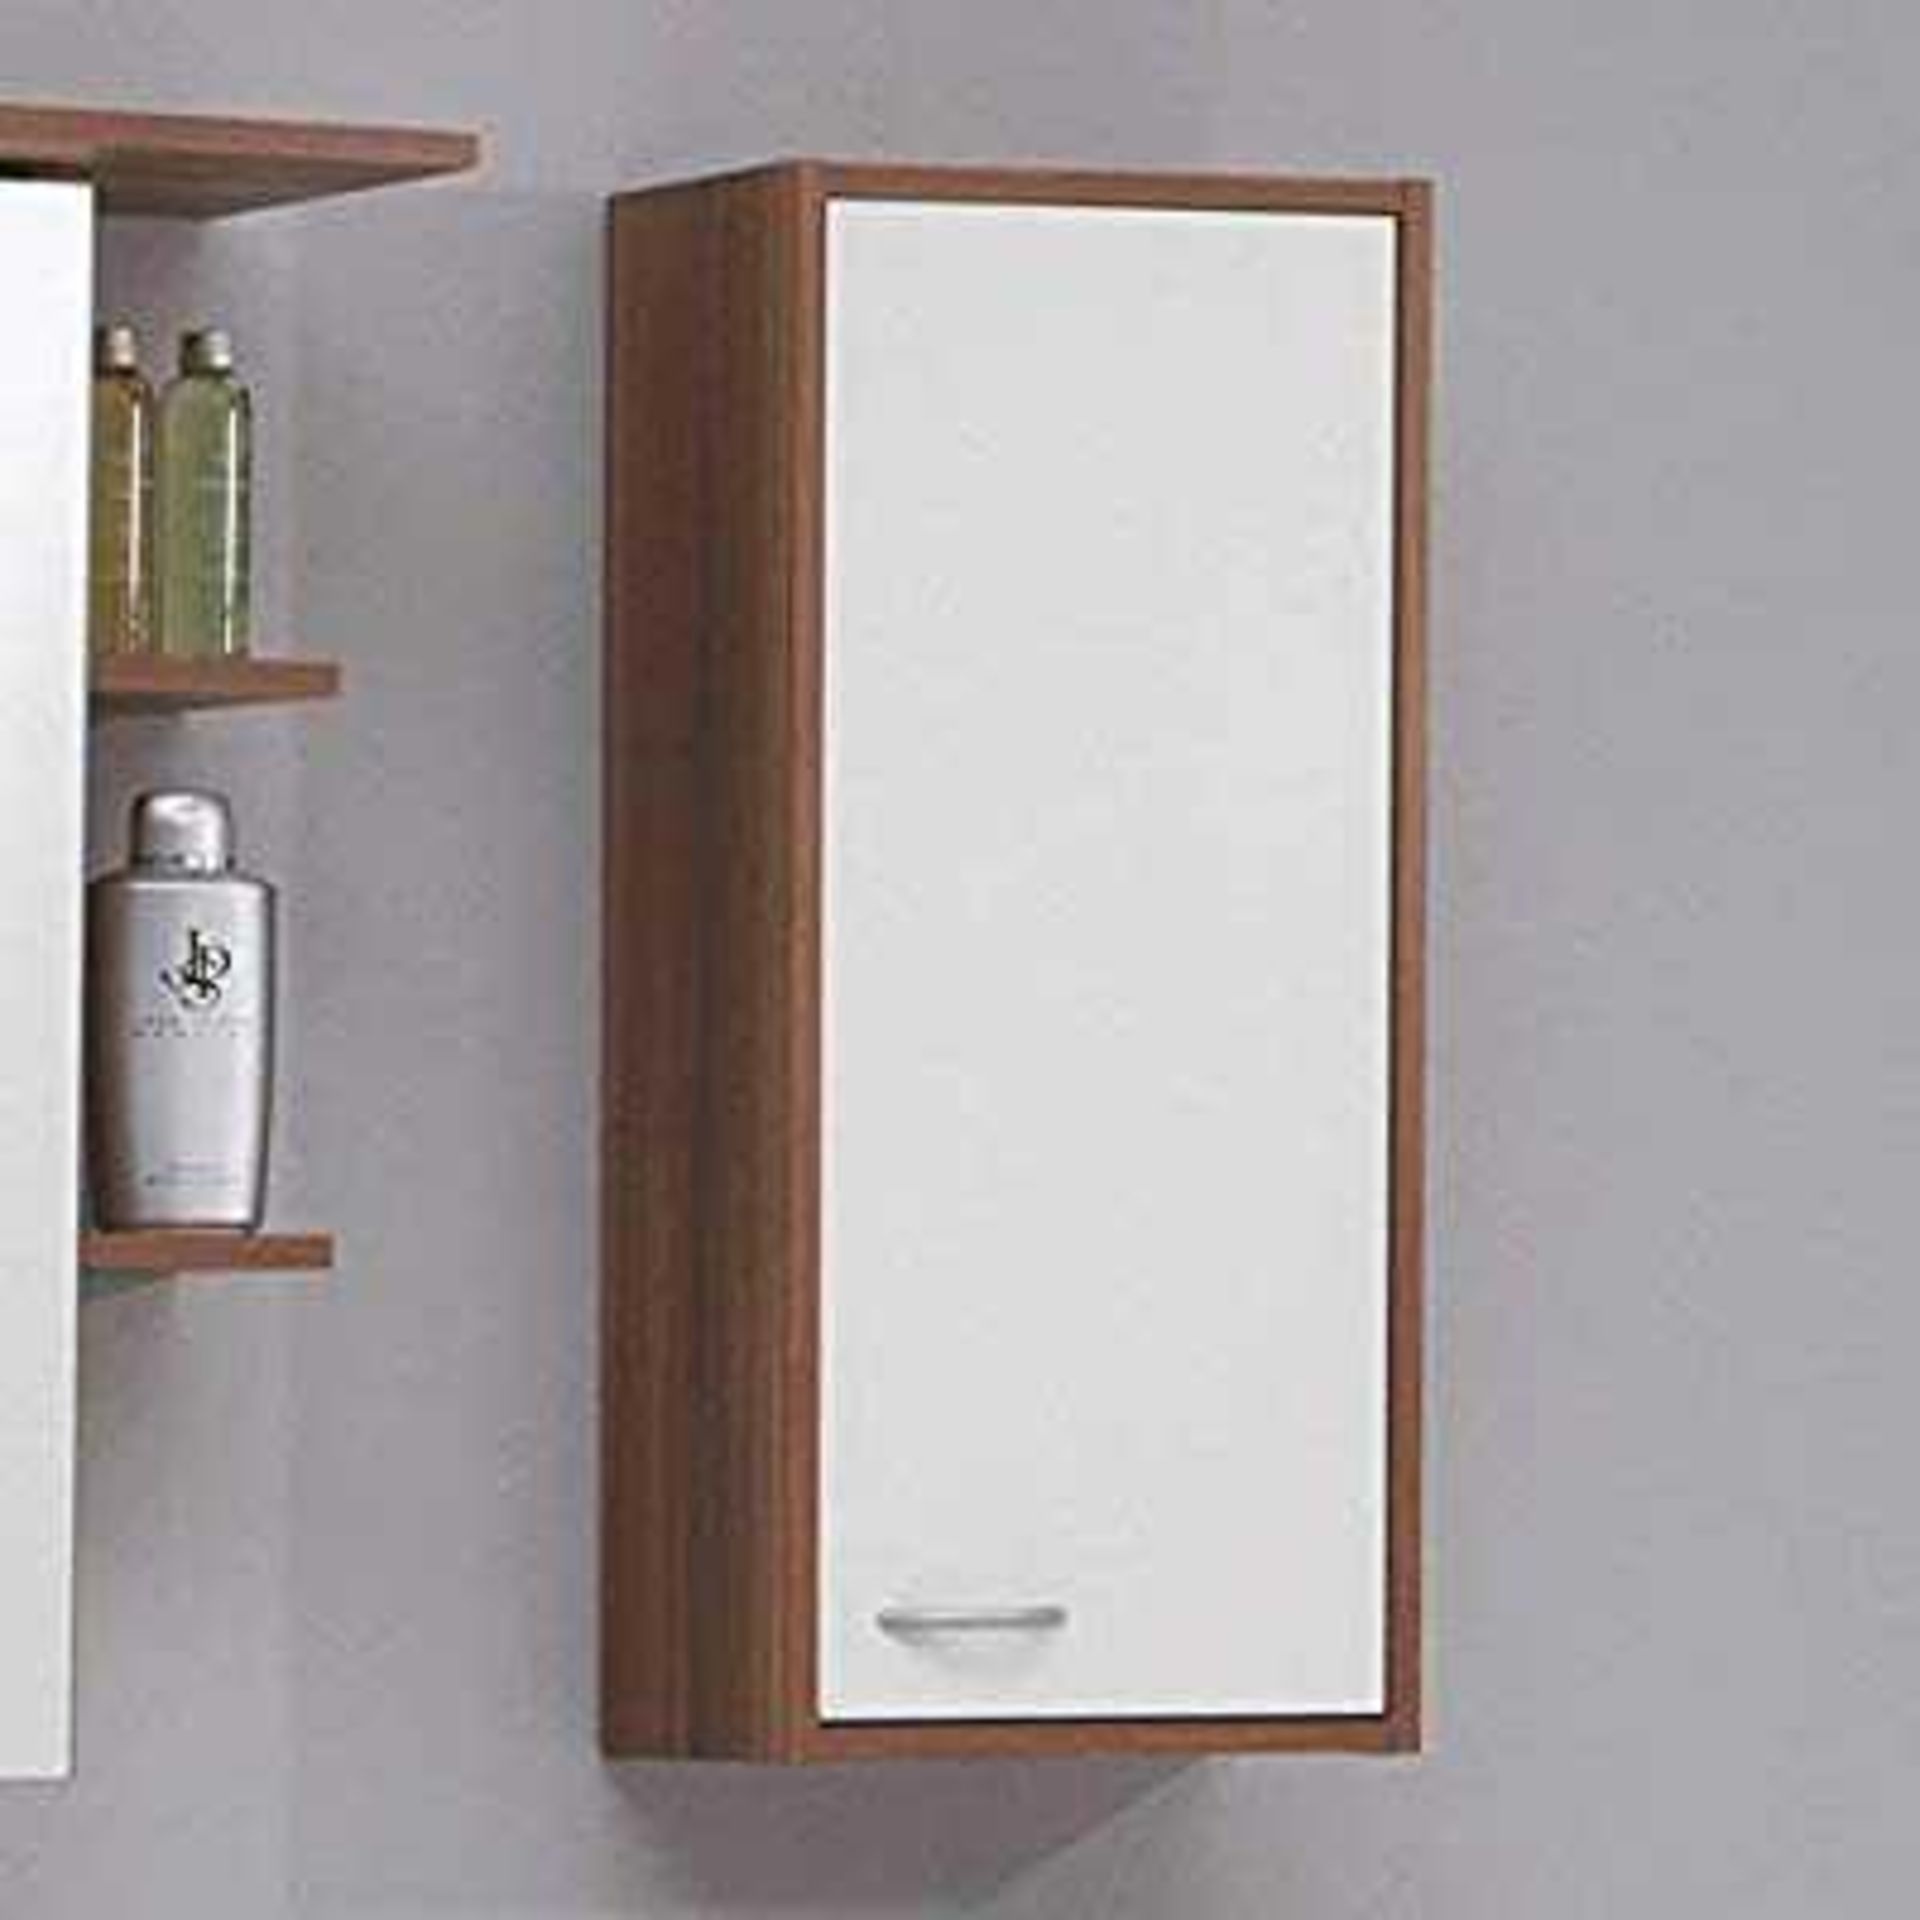 RRP £70. Boxed New Fmd Madrid 1 Wall Mounted Cabinet - White (Appraisals Available On Request)(